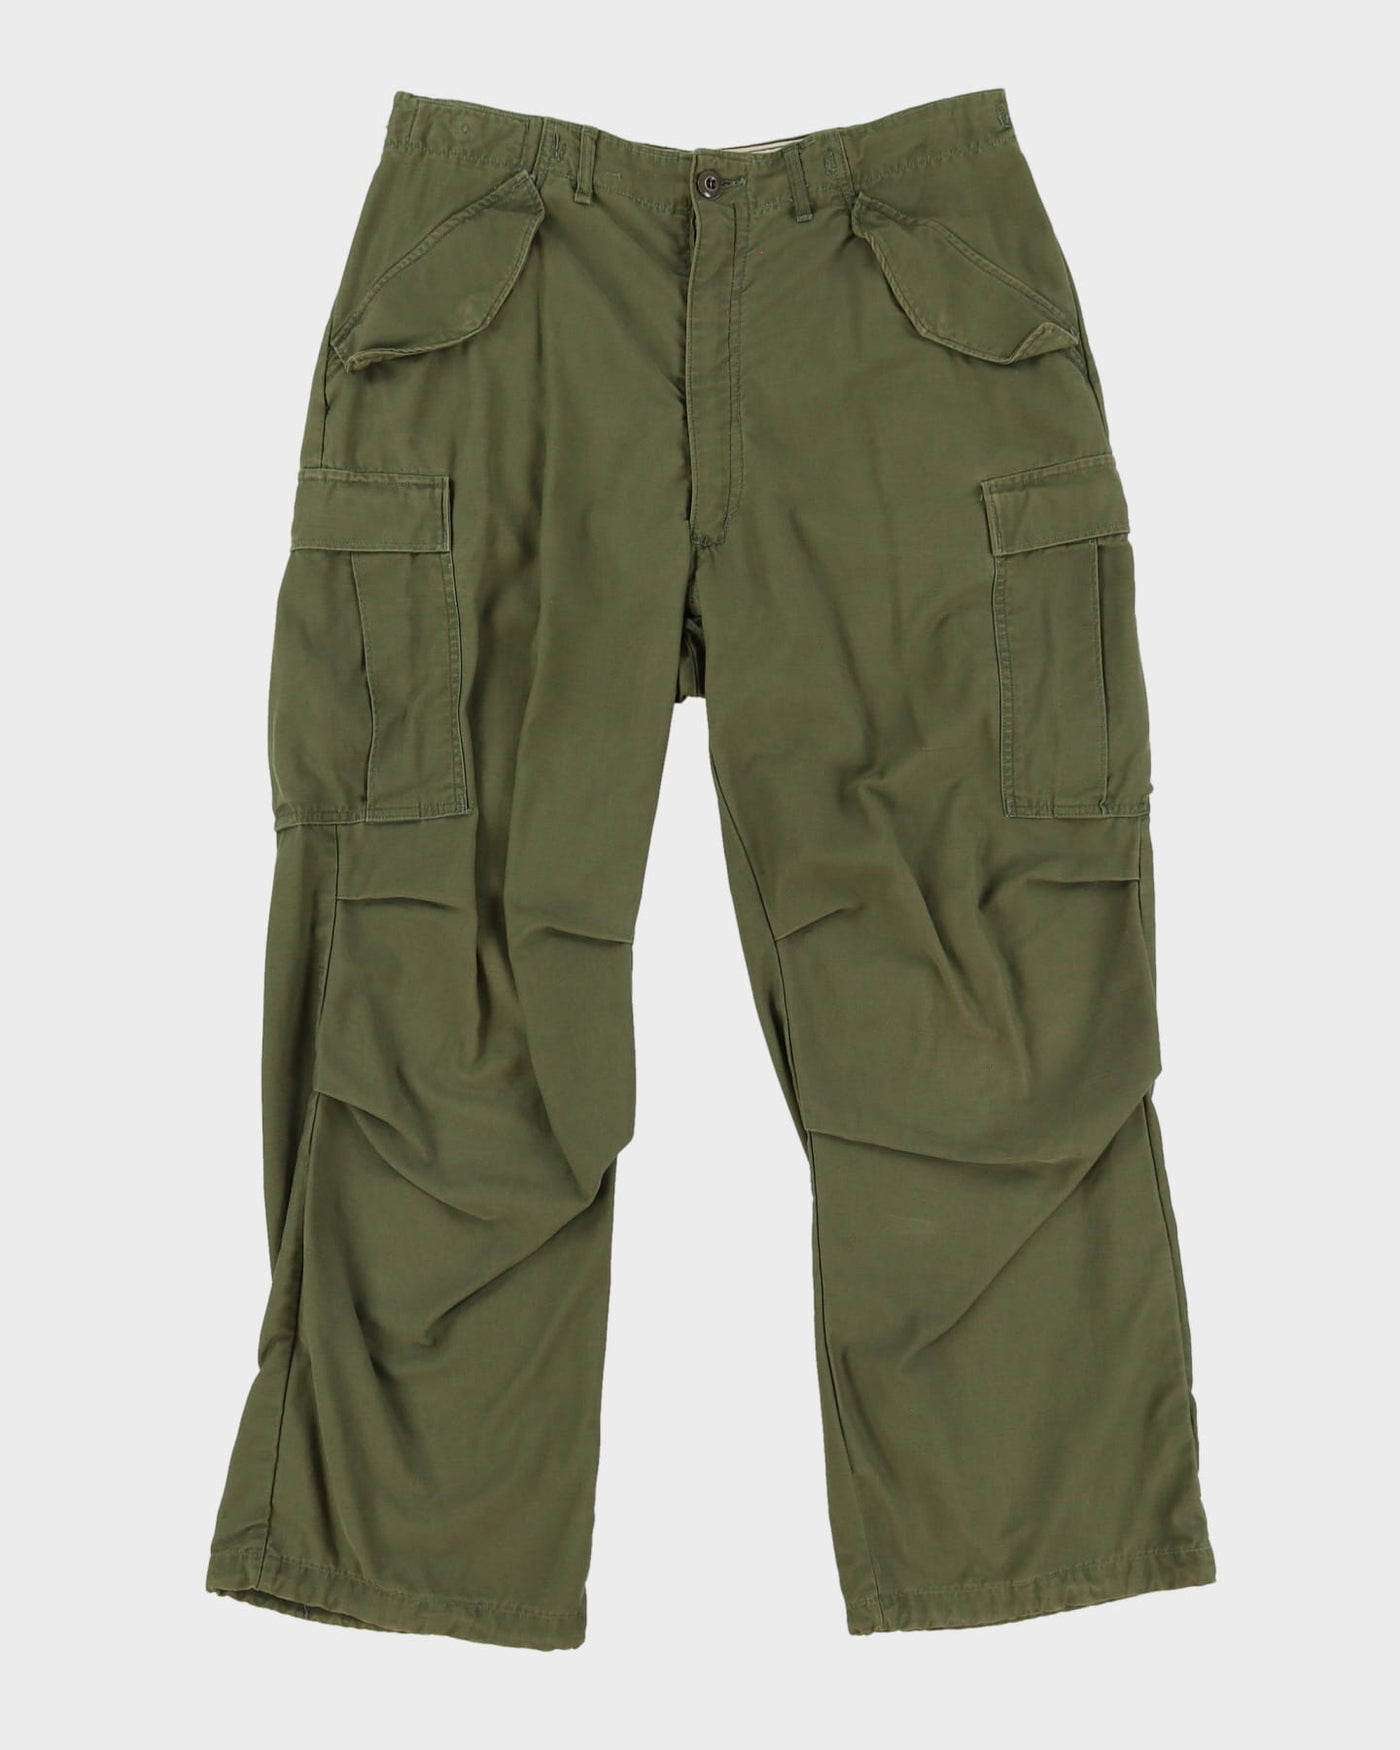 1972 Vintage US Army M65 Cold Weather Trousers - 34x30